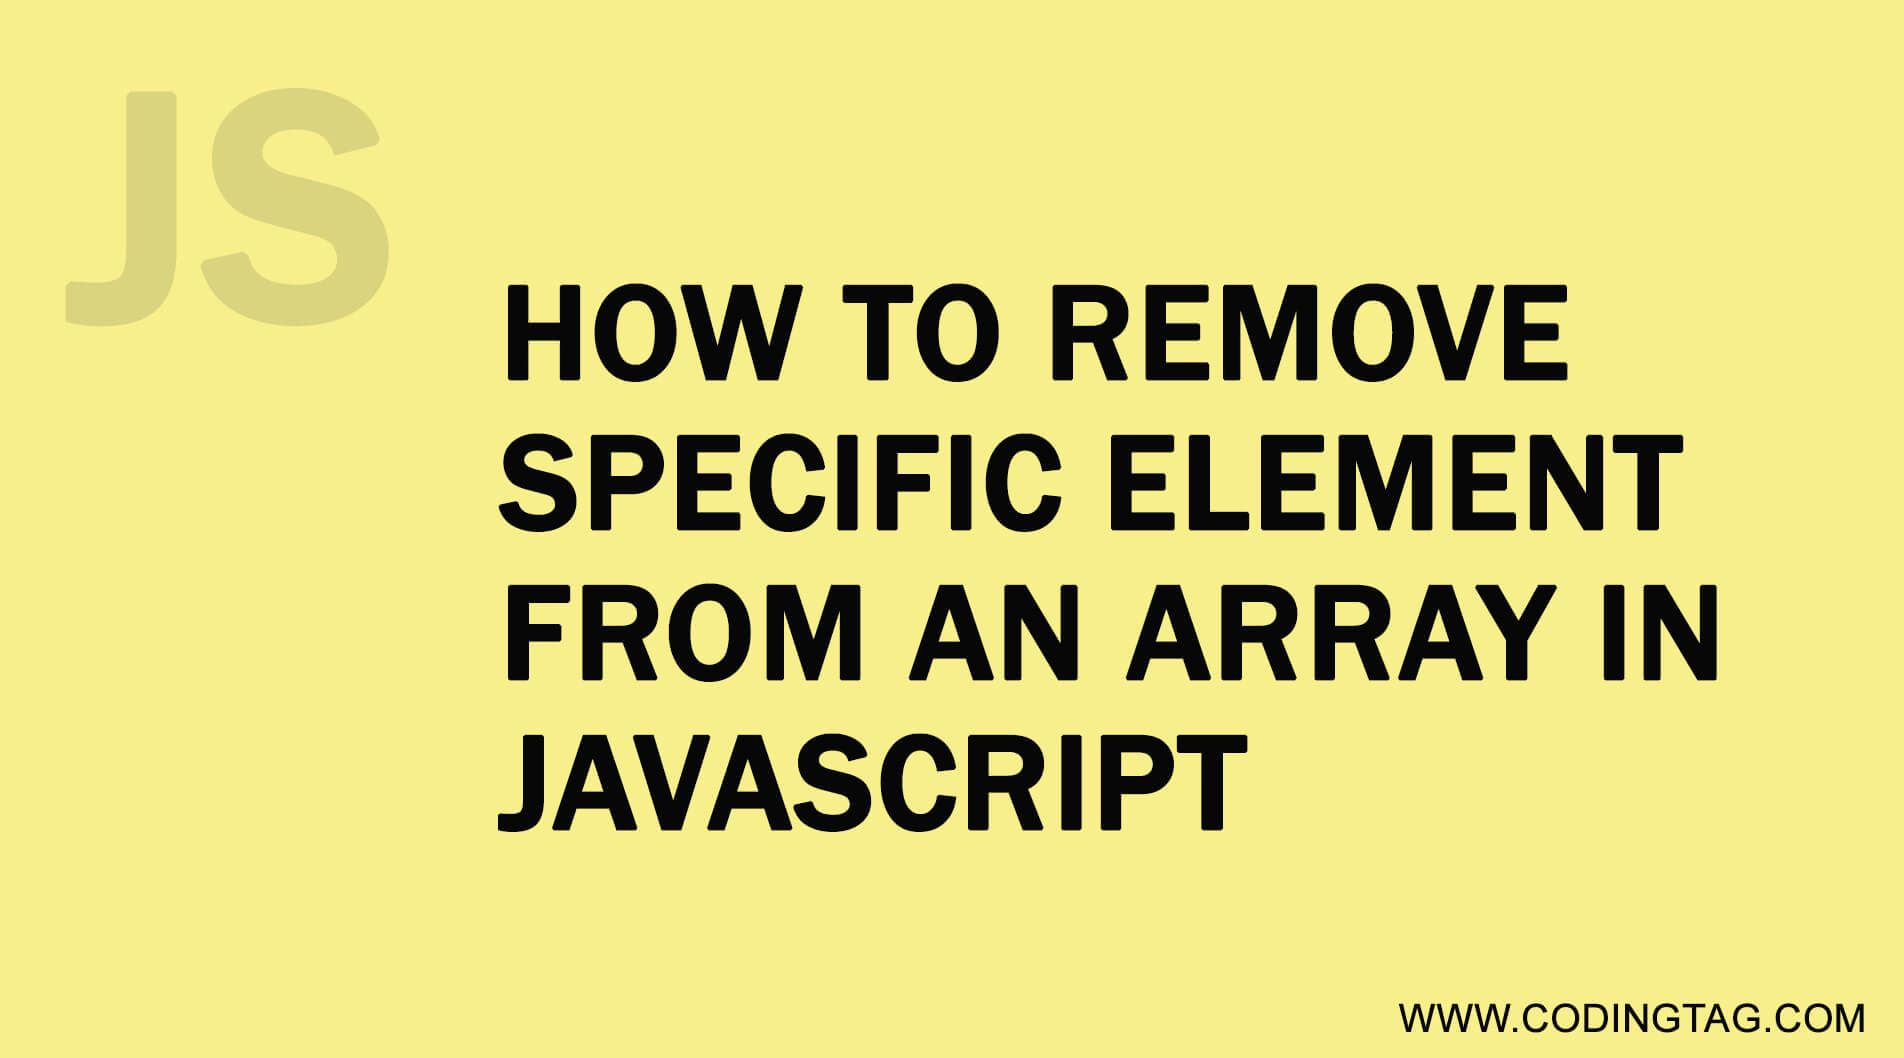 How to remove specific element from an array in JavaScript